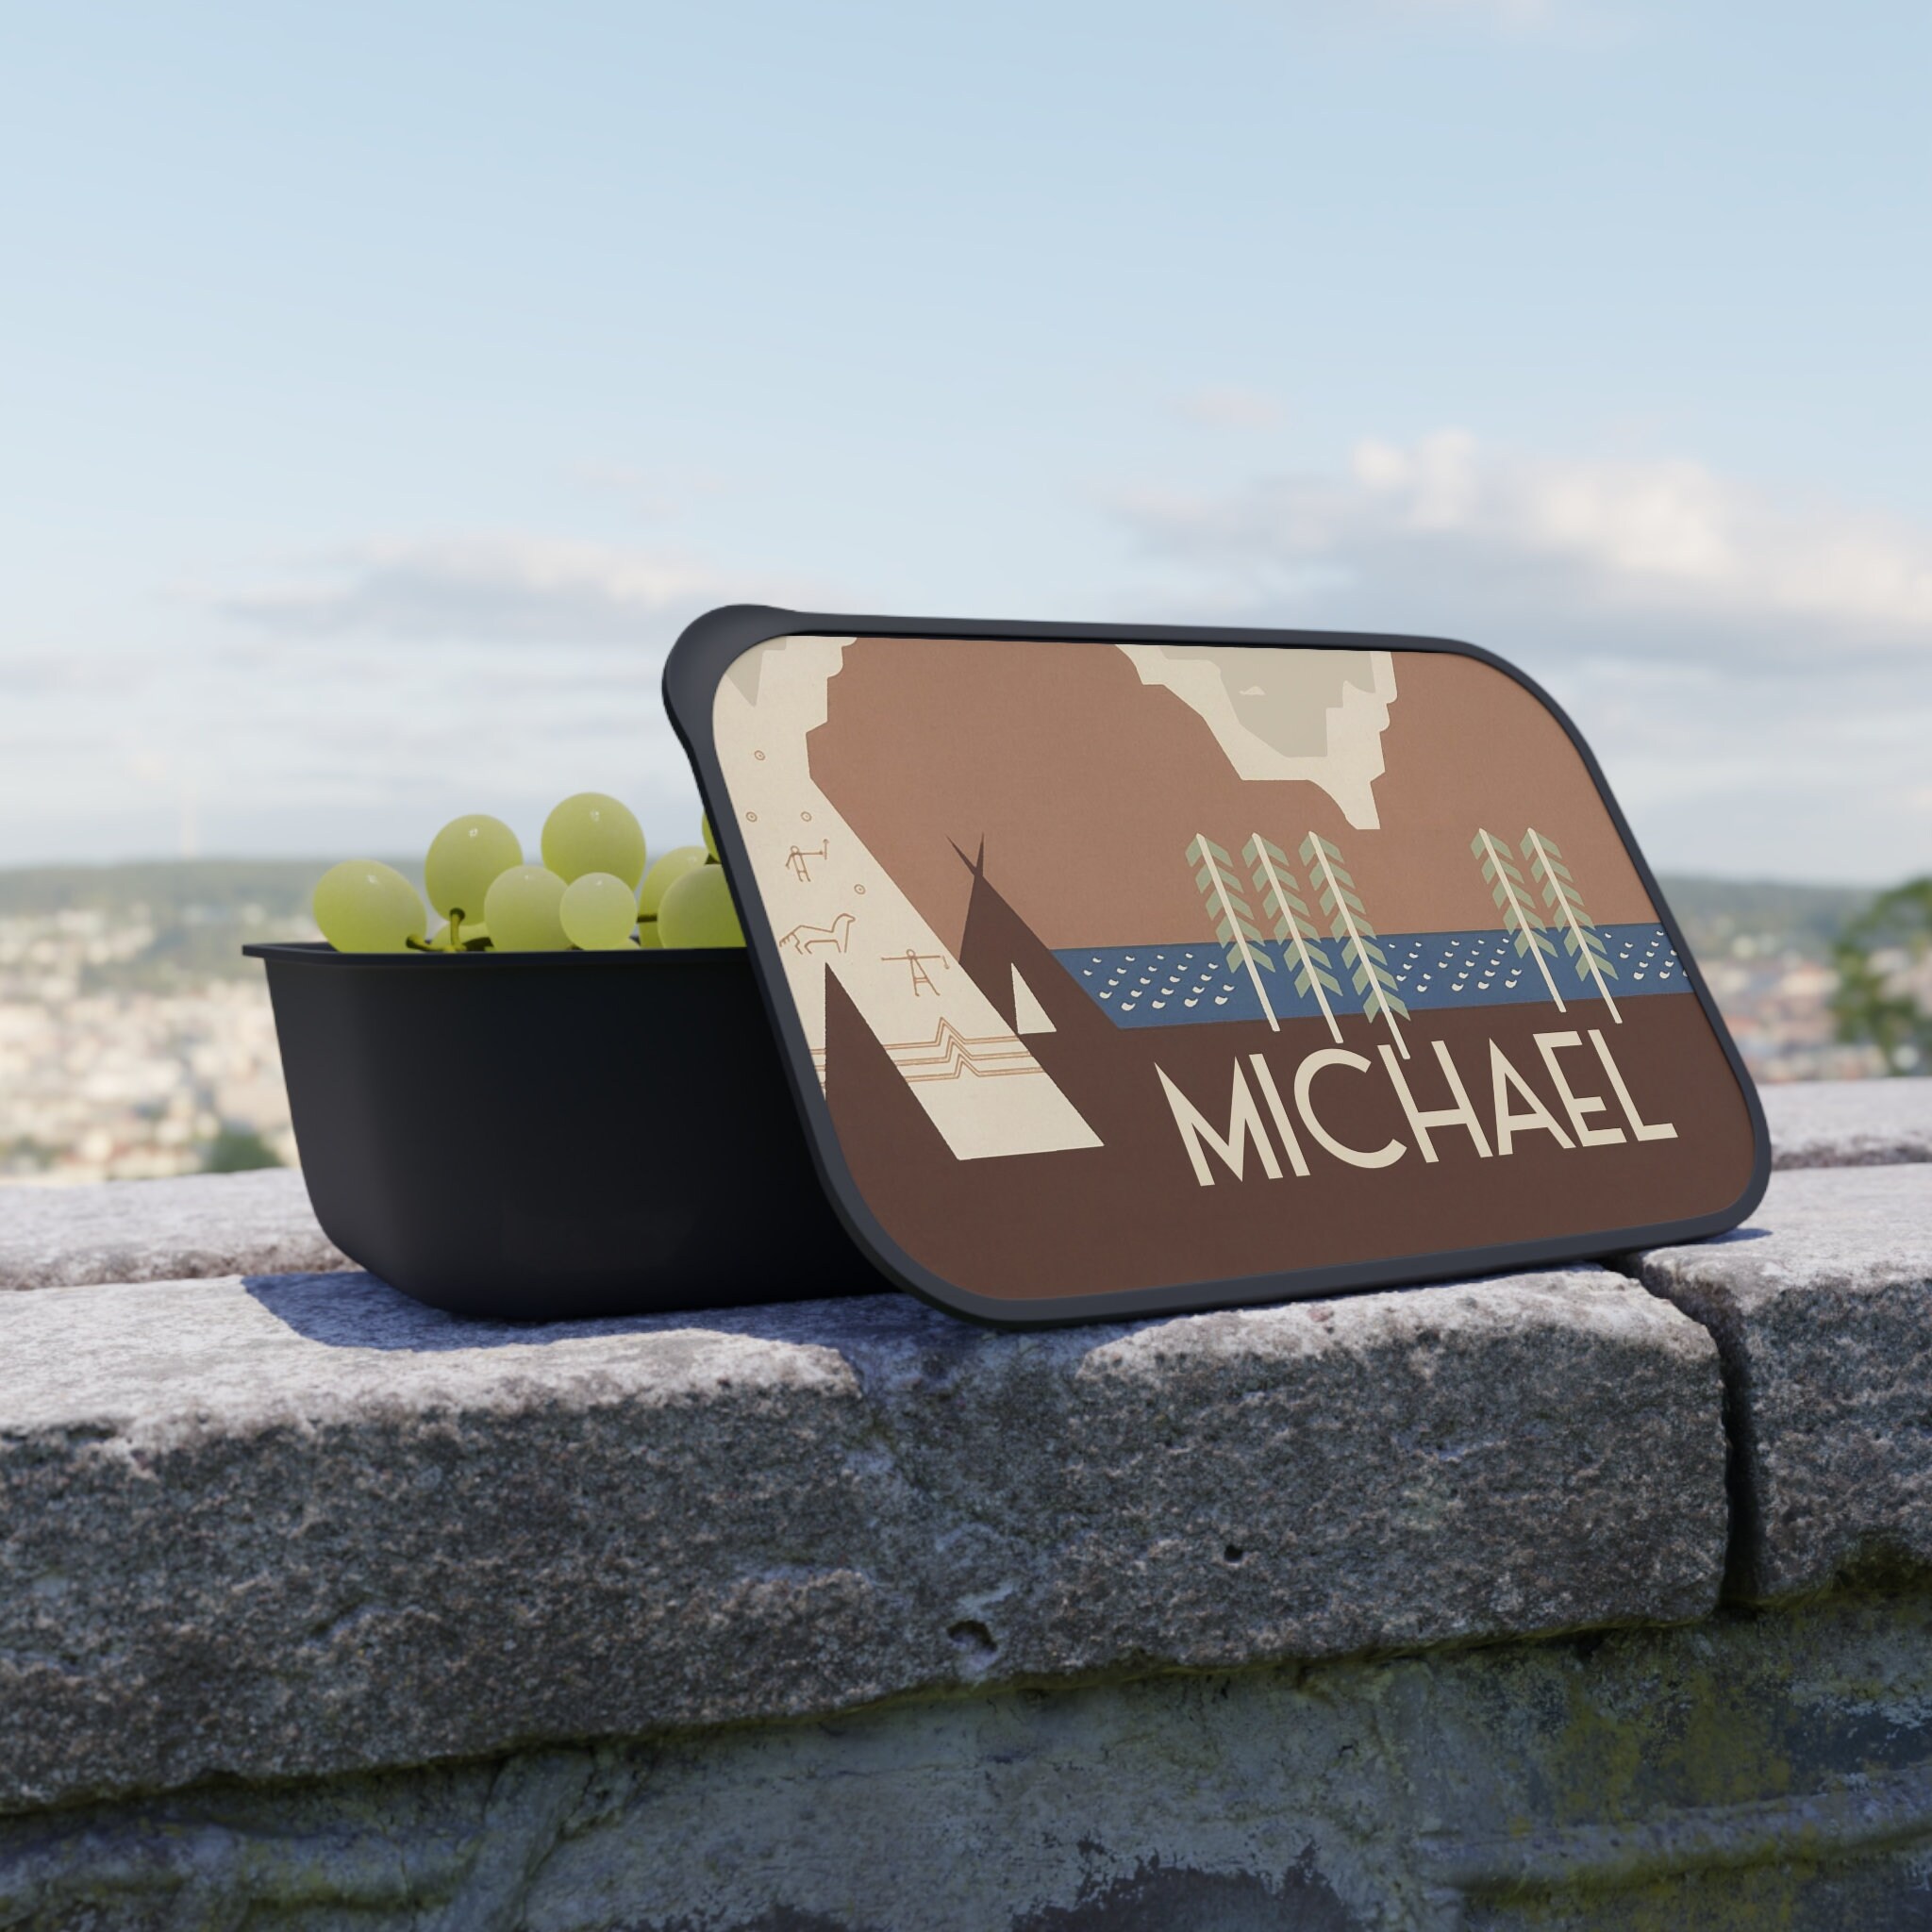 Montana Mountains Lunch Box, Bento Box for Adults, Personalized